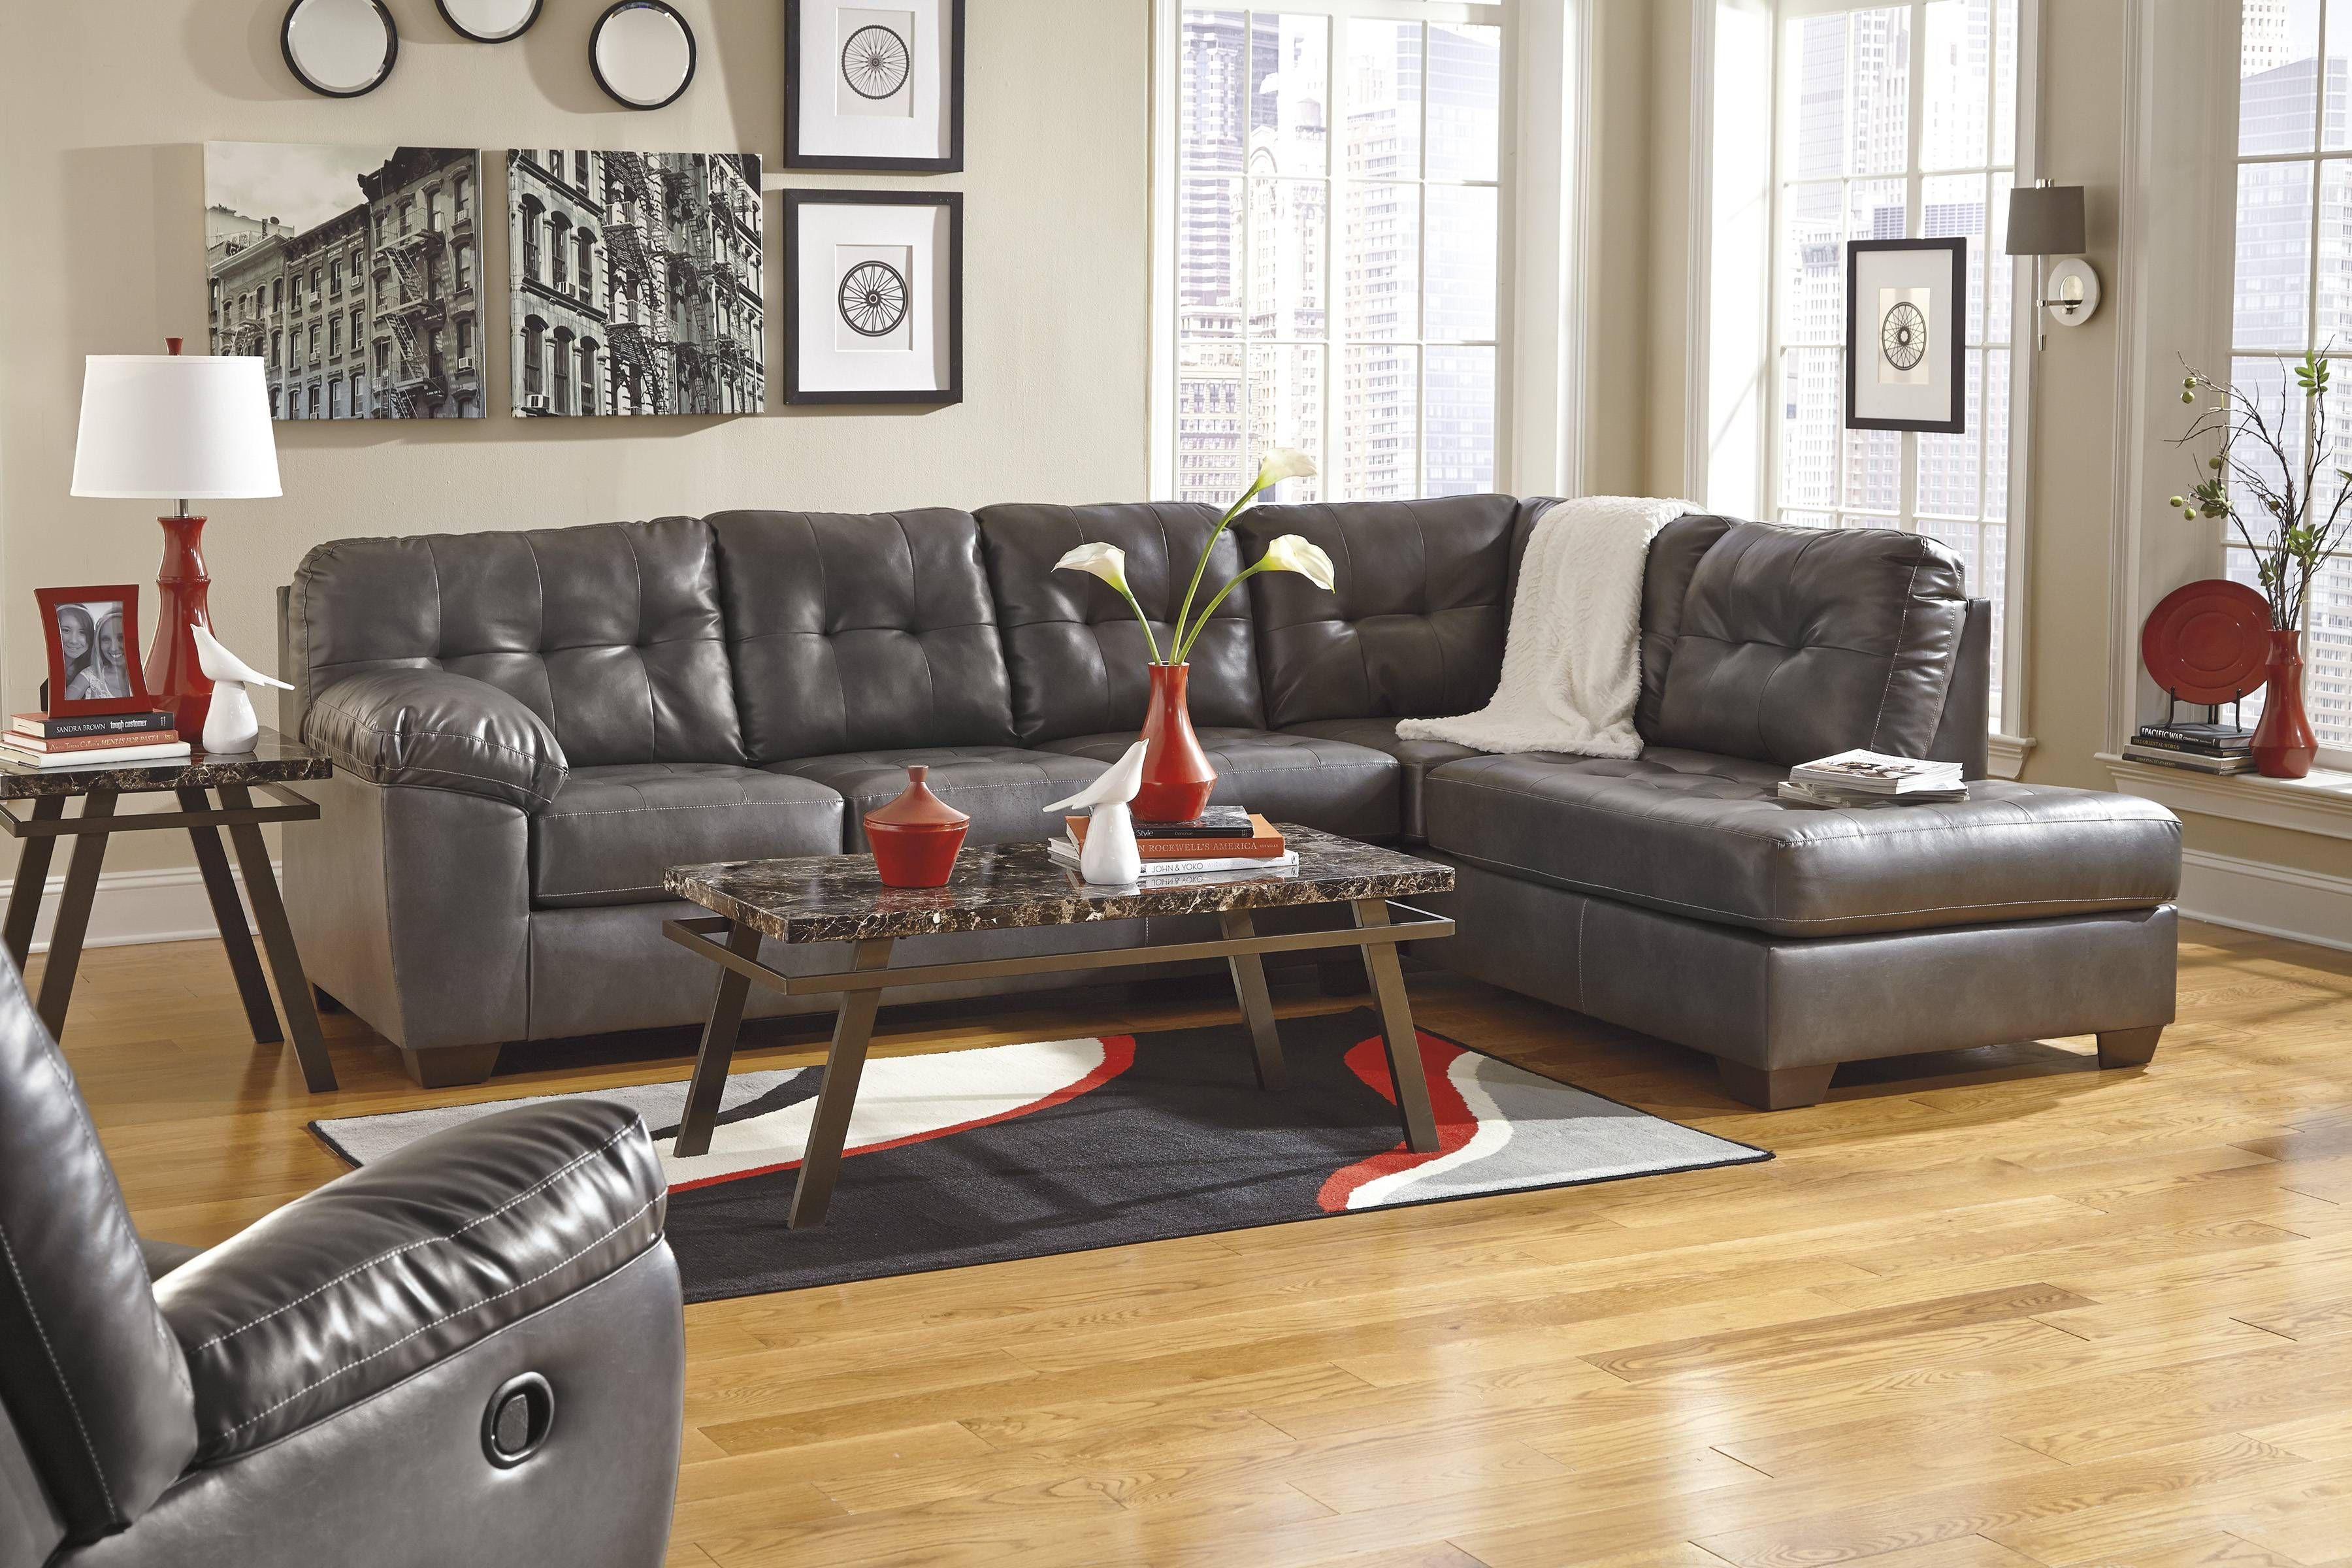 Chair & Sofa: Sectional Sofas At Ashley Furniture | Ashley For Ashley Furniture Gray Sofa (View 22 of 30)